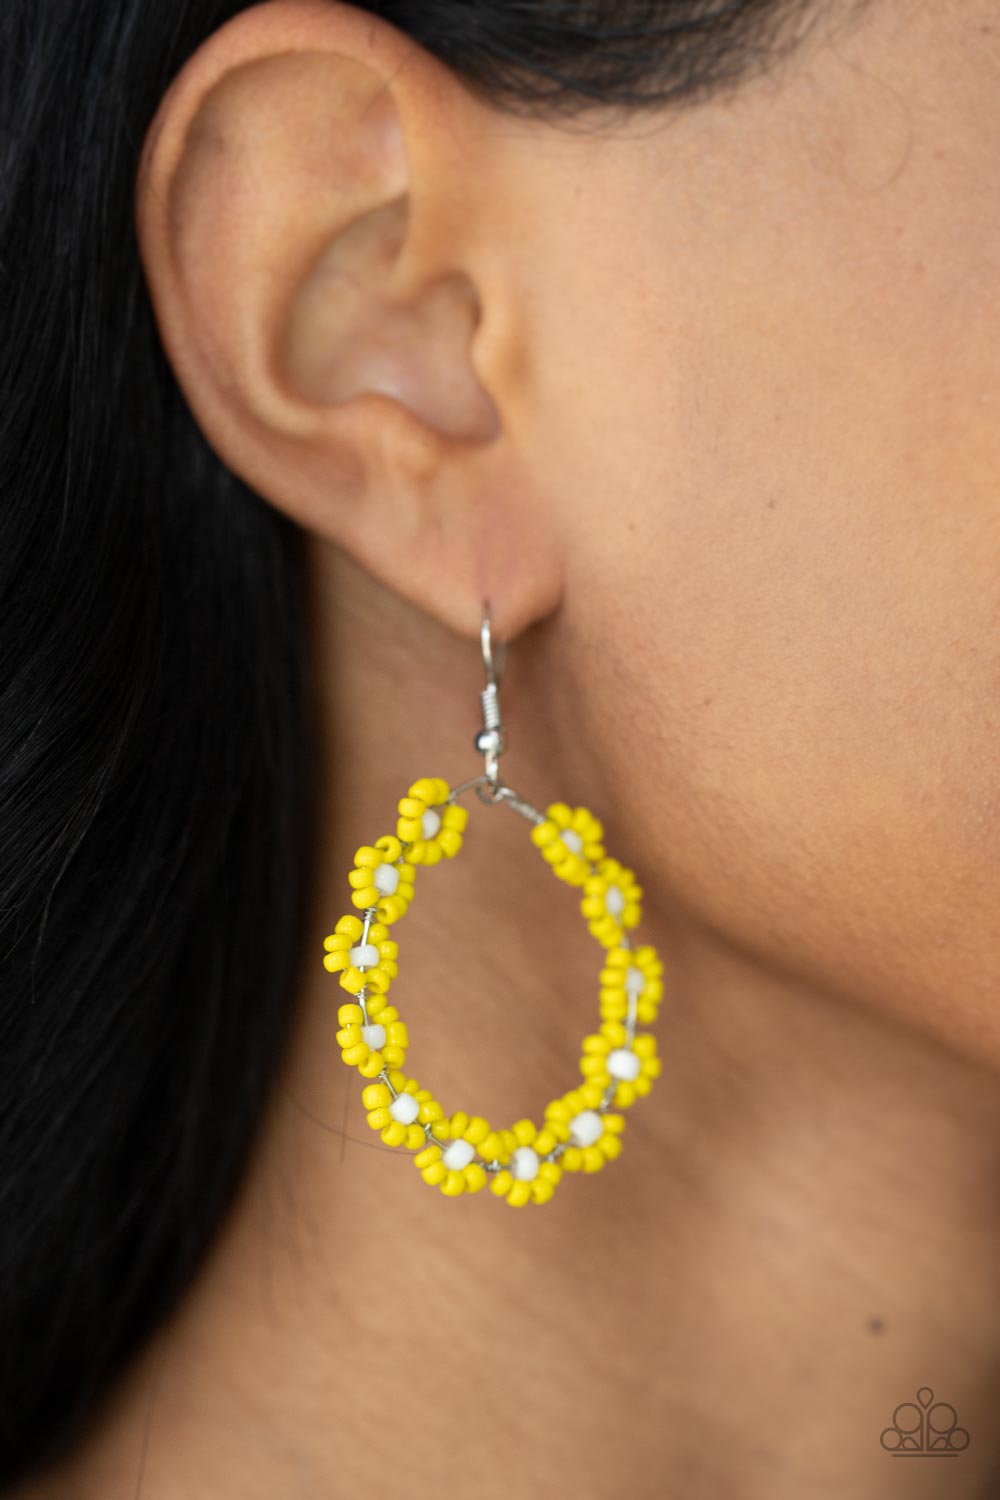 Festively Flower Child - Yellow & White Seed Bead Earrings - Princess Glam Shop